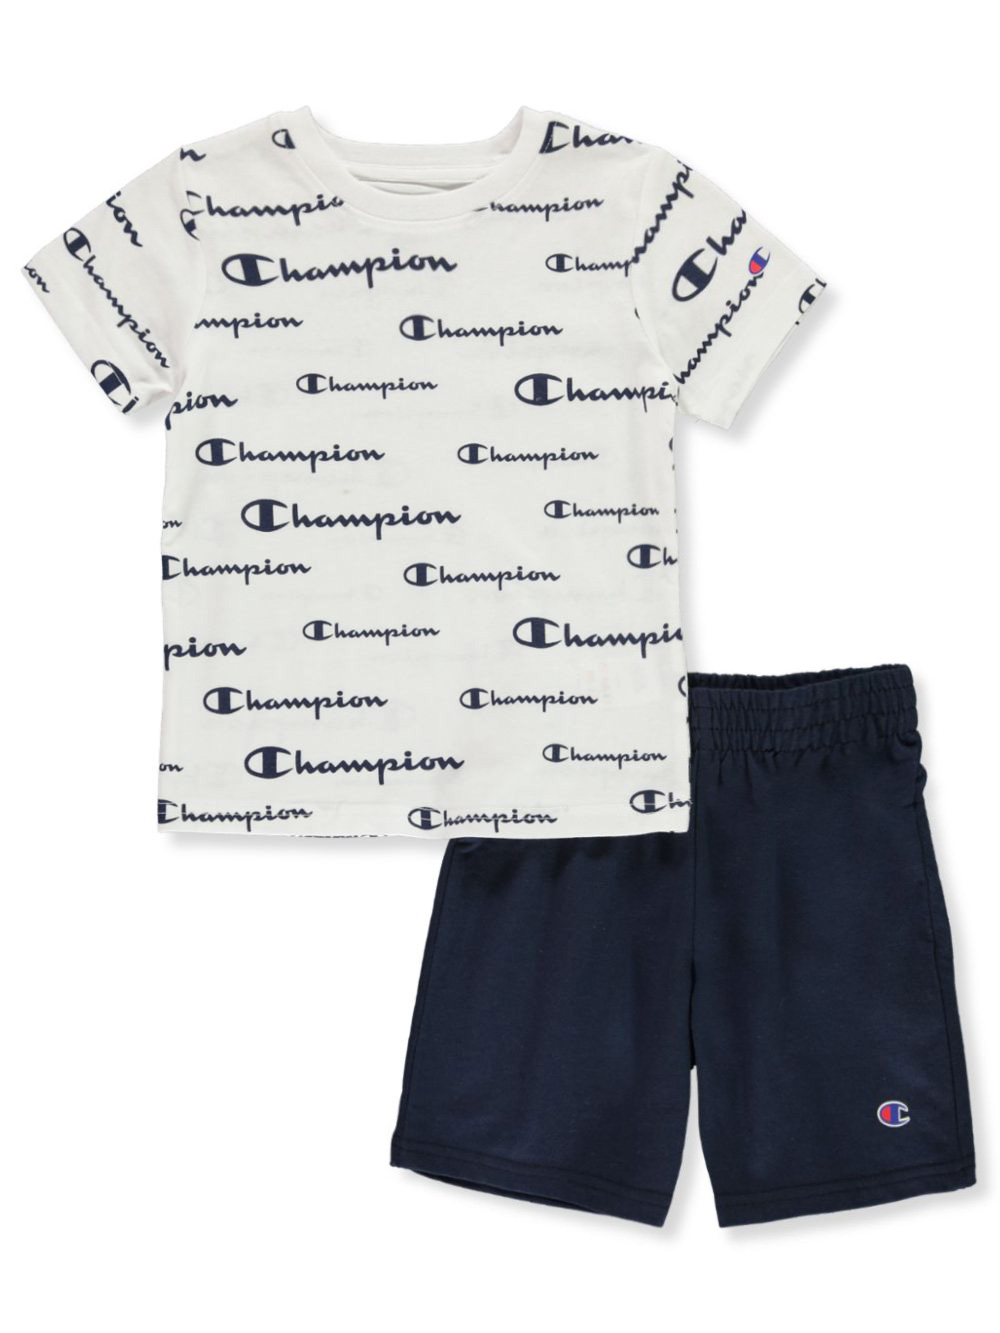 champion 3t outfits